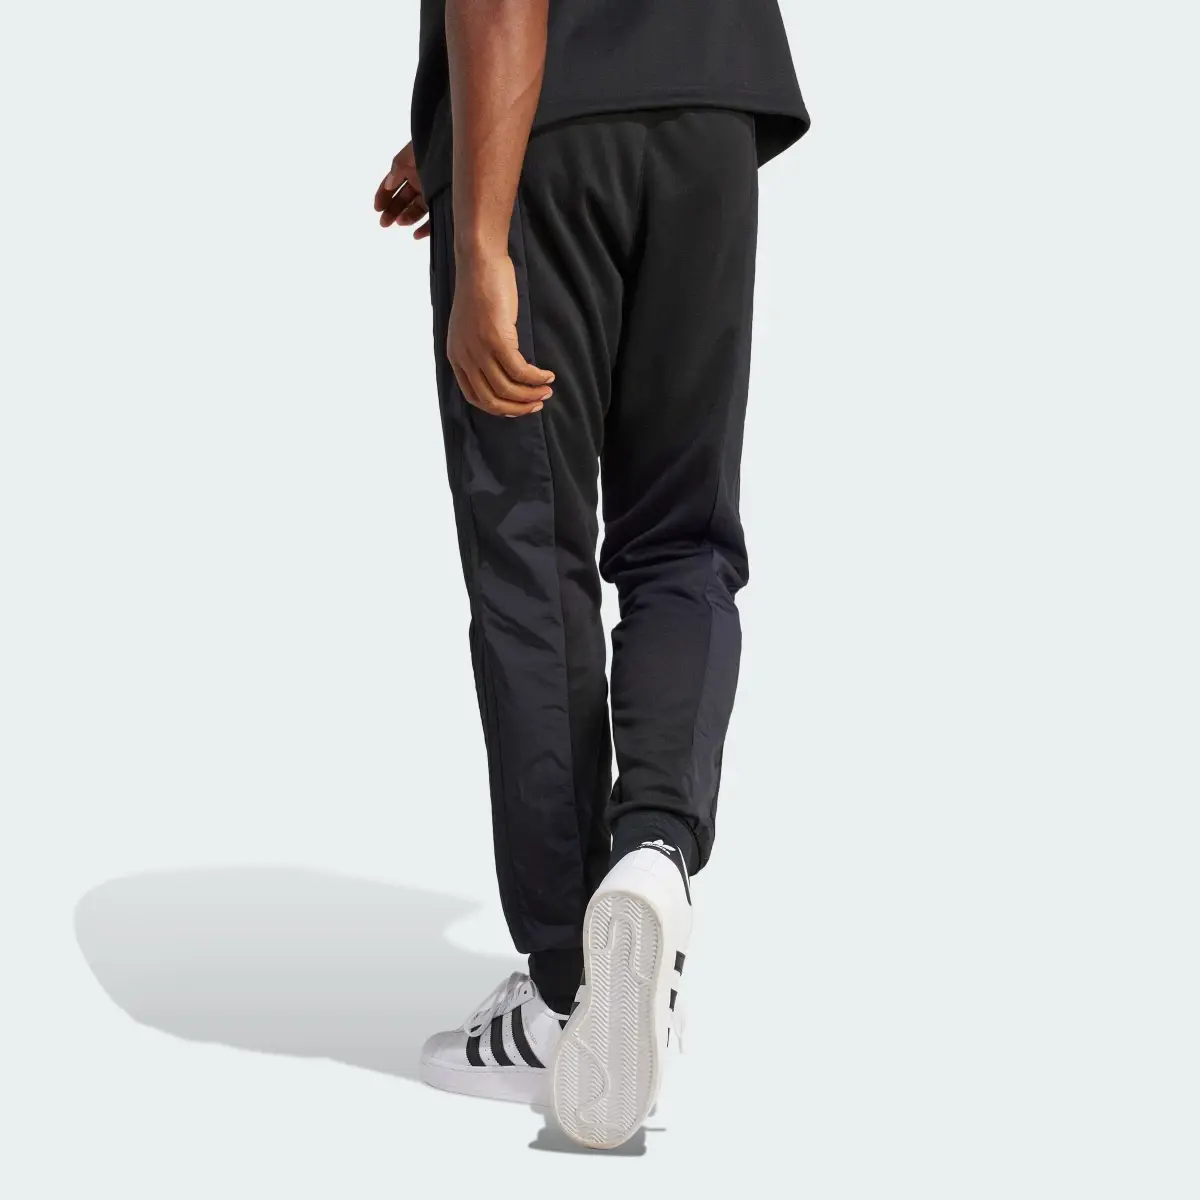 Adidas Track pants adicolor Re-Pro SST Material Mix. 2